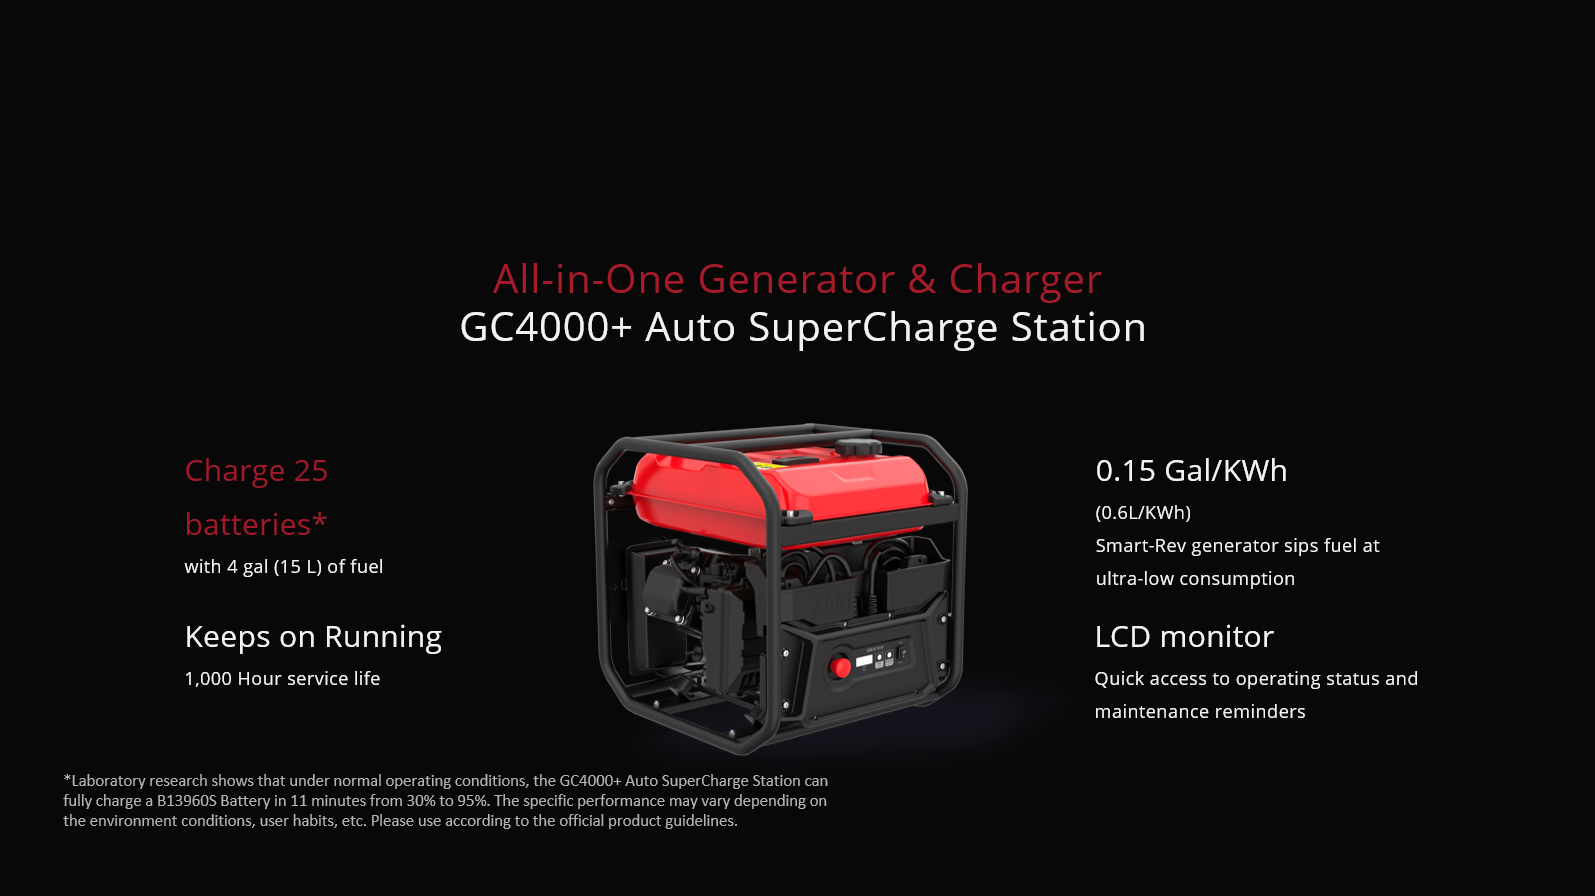 GC4OOO+ Auto SuperCharge Station can charge 25 0.15 Gal/KW